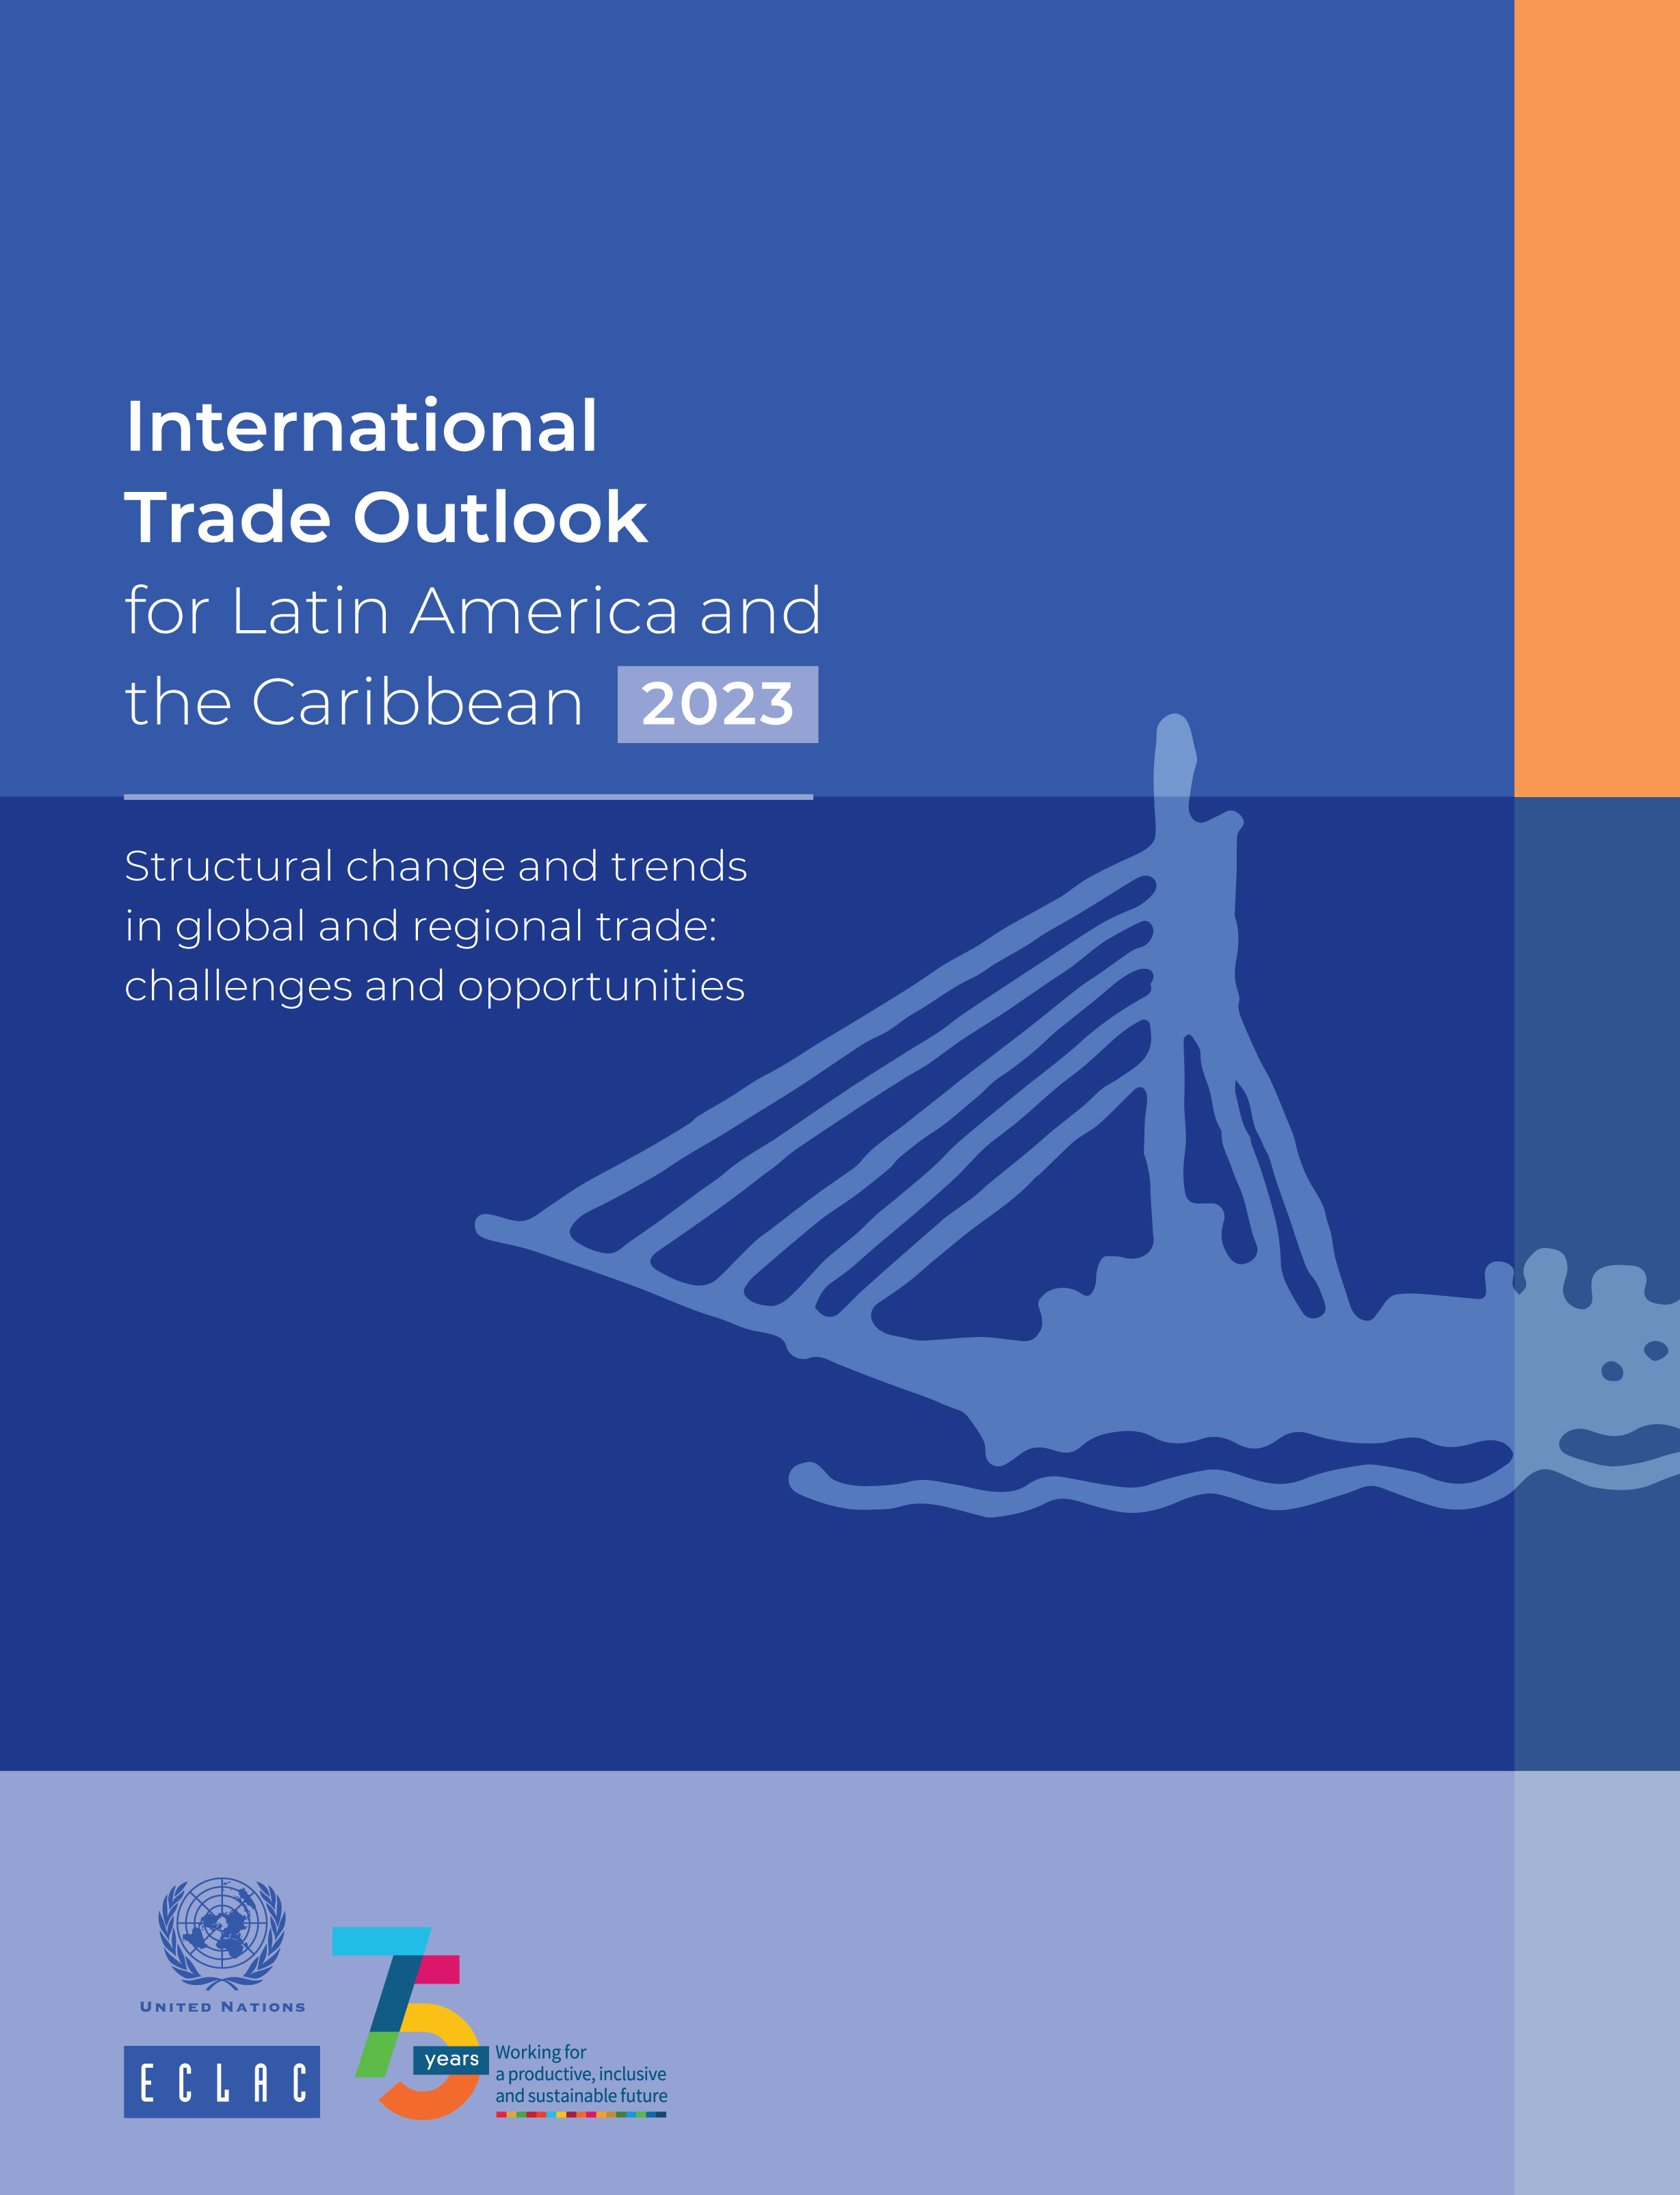 image of International Trade Outlook for Latin America and the Caribbean 2023